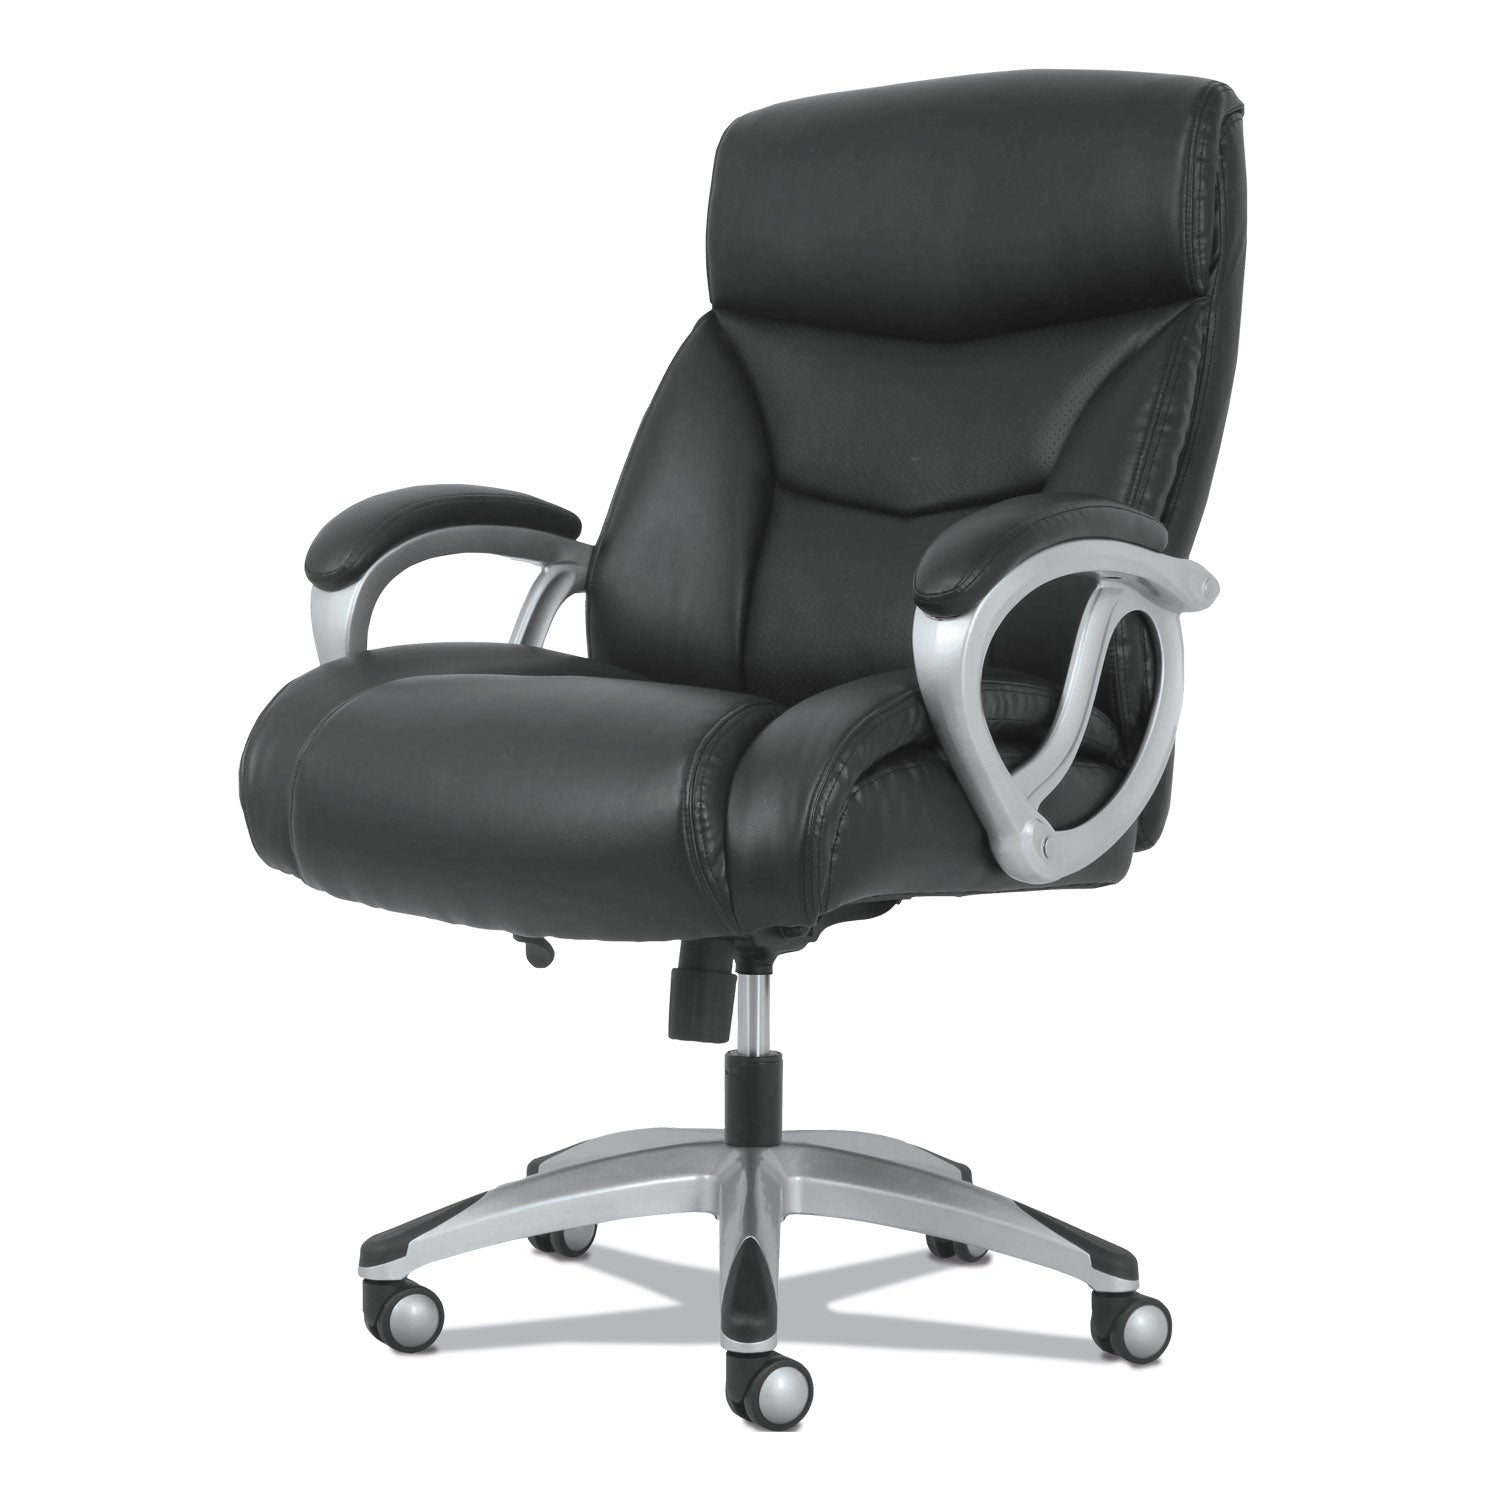 3-forty-one-big-and-tall-chair-supports-up-to-400-lb-19-to-22-seat-height-black-seat-back-chrome-base_bsxvst341 - 2